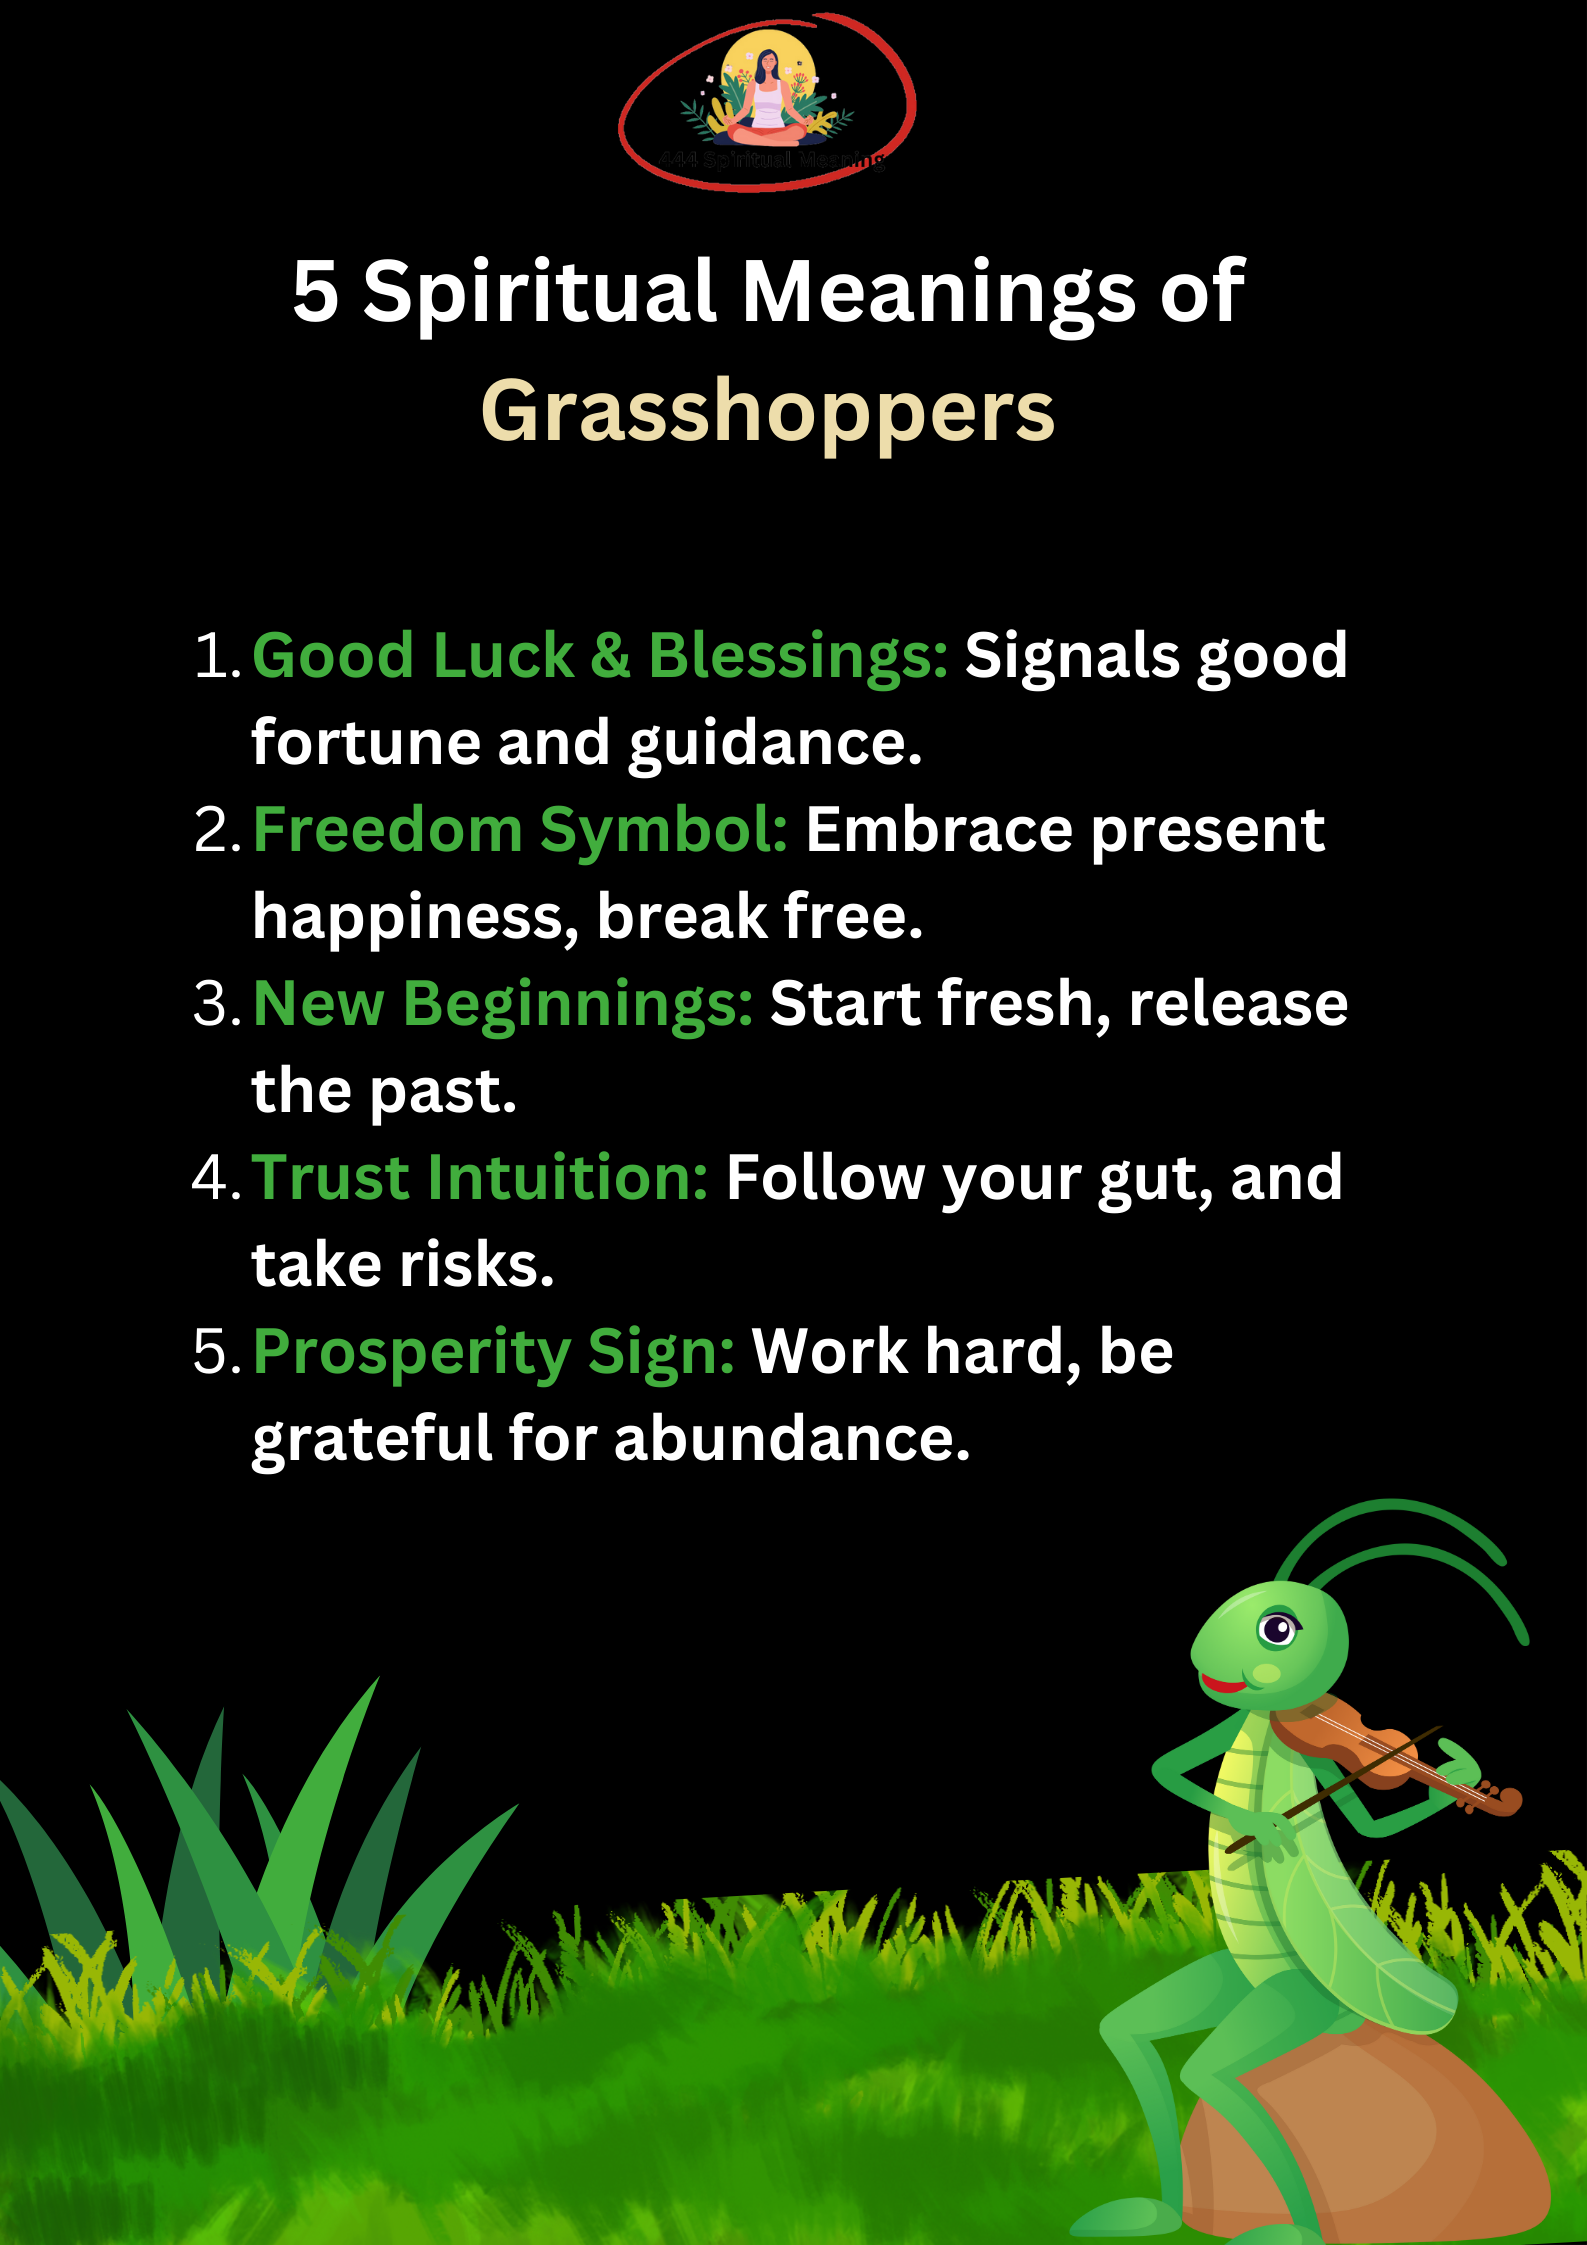 5 Spiritual Meanings of Grasshoppers